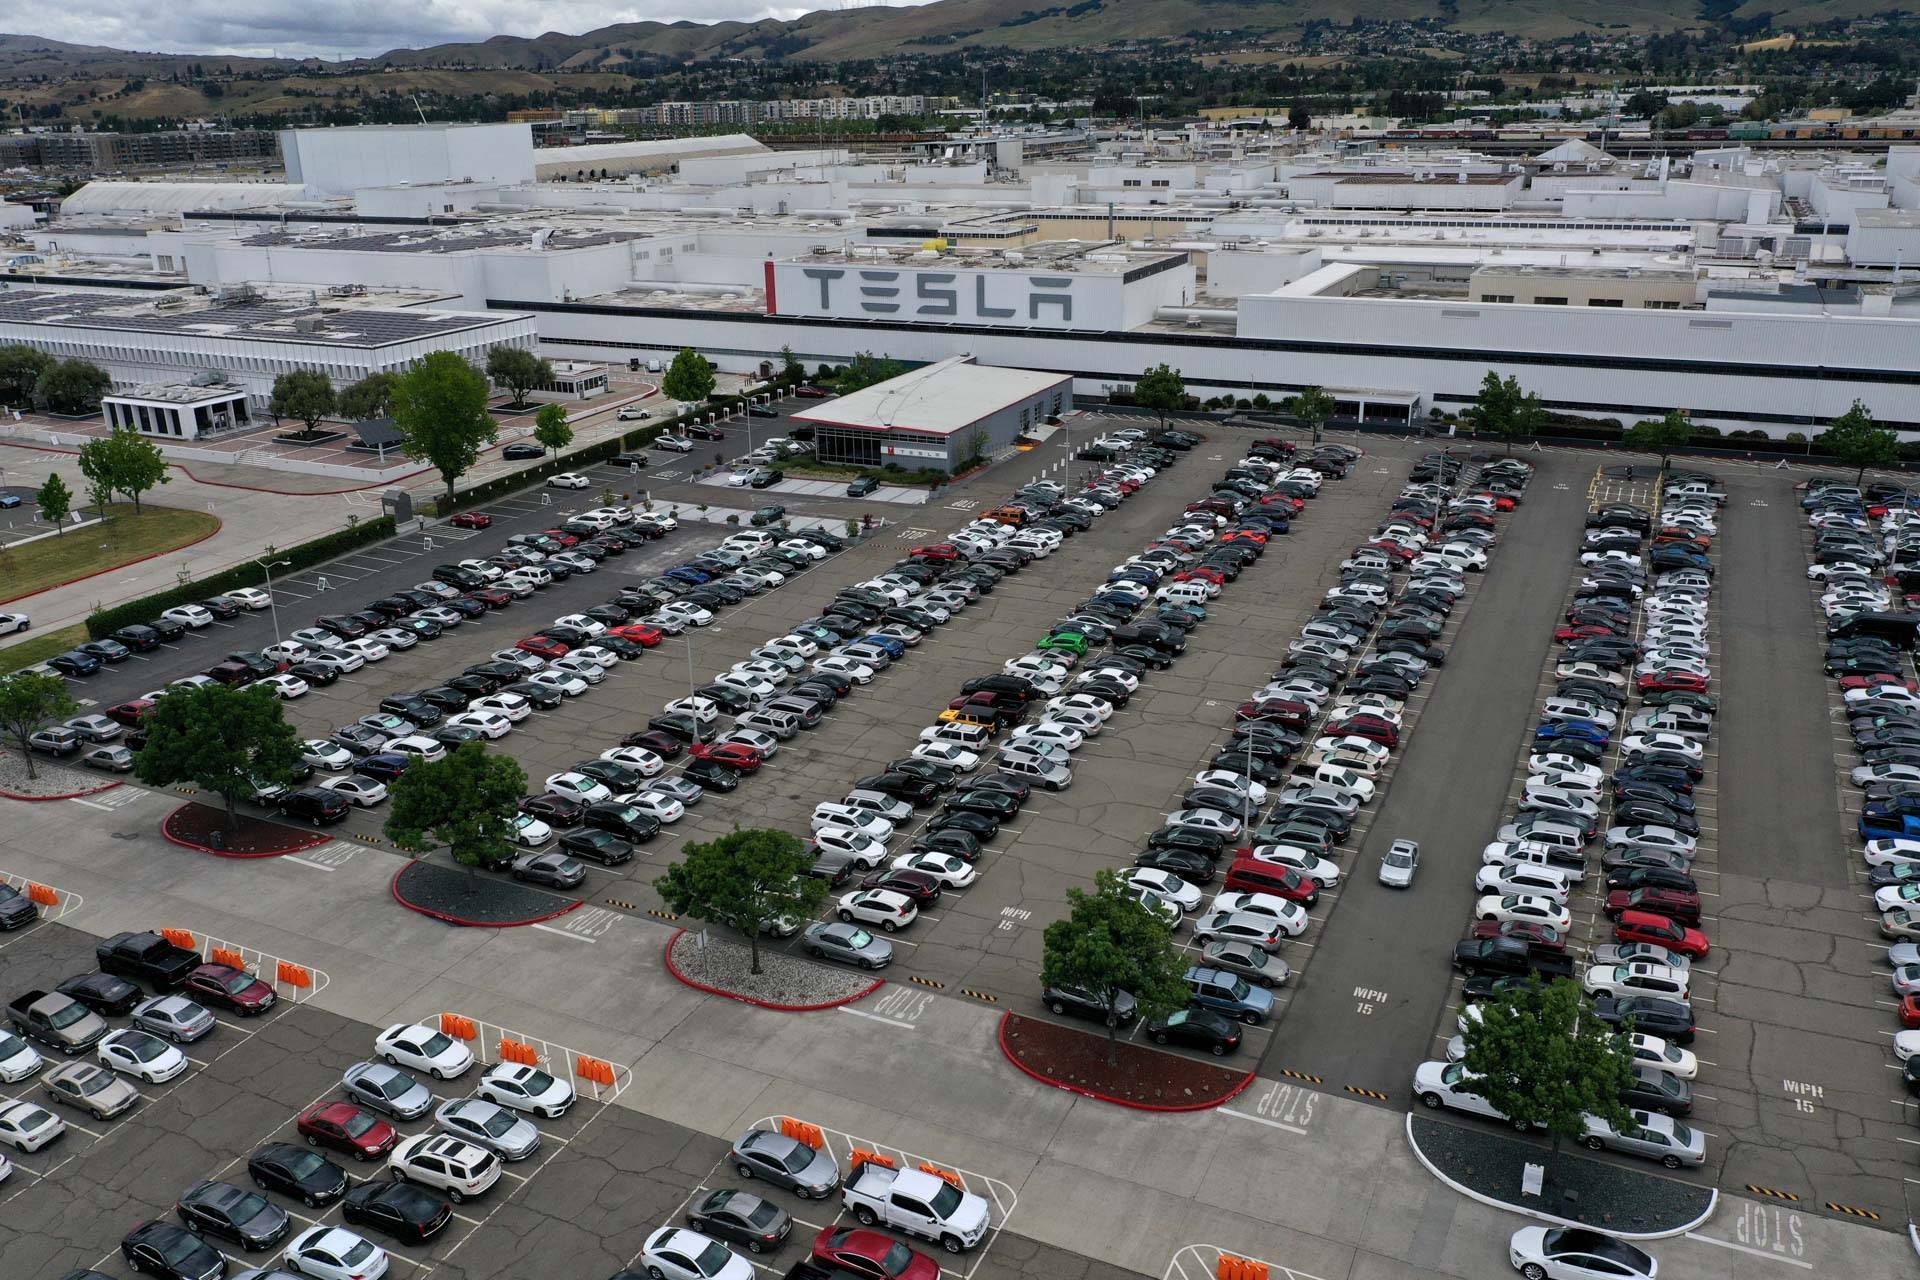 An aerial view of Tesla's plant in Fremont on May 12, 2020, the day after CEO Elon Musk declared he had opened the facility "against Alameda County rules" that shut down production in late March. Local officials described the reopening as ramping up "minimum basic operations." The company is expected to be in full production this week. Justin Sullivan/Getty Images